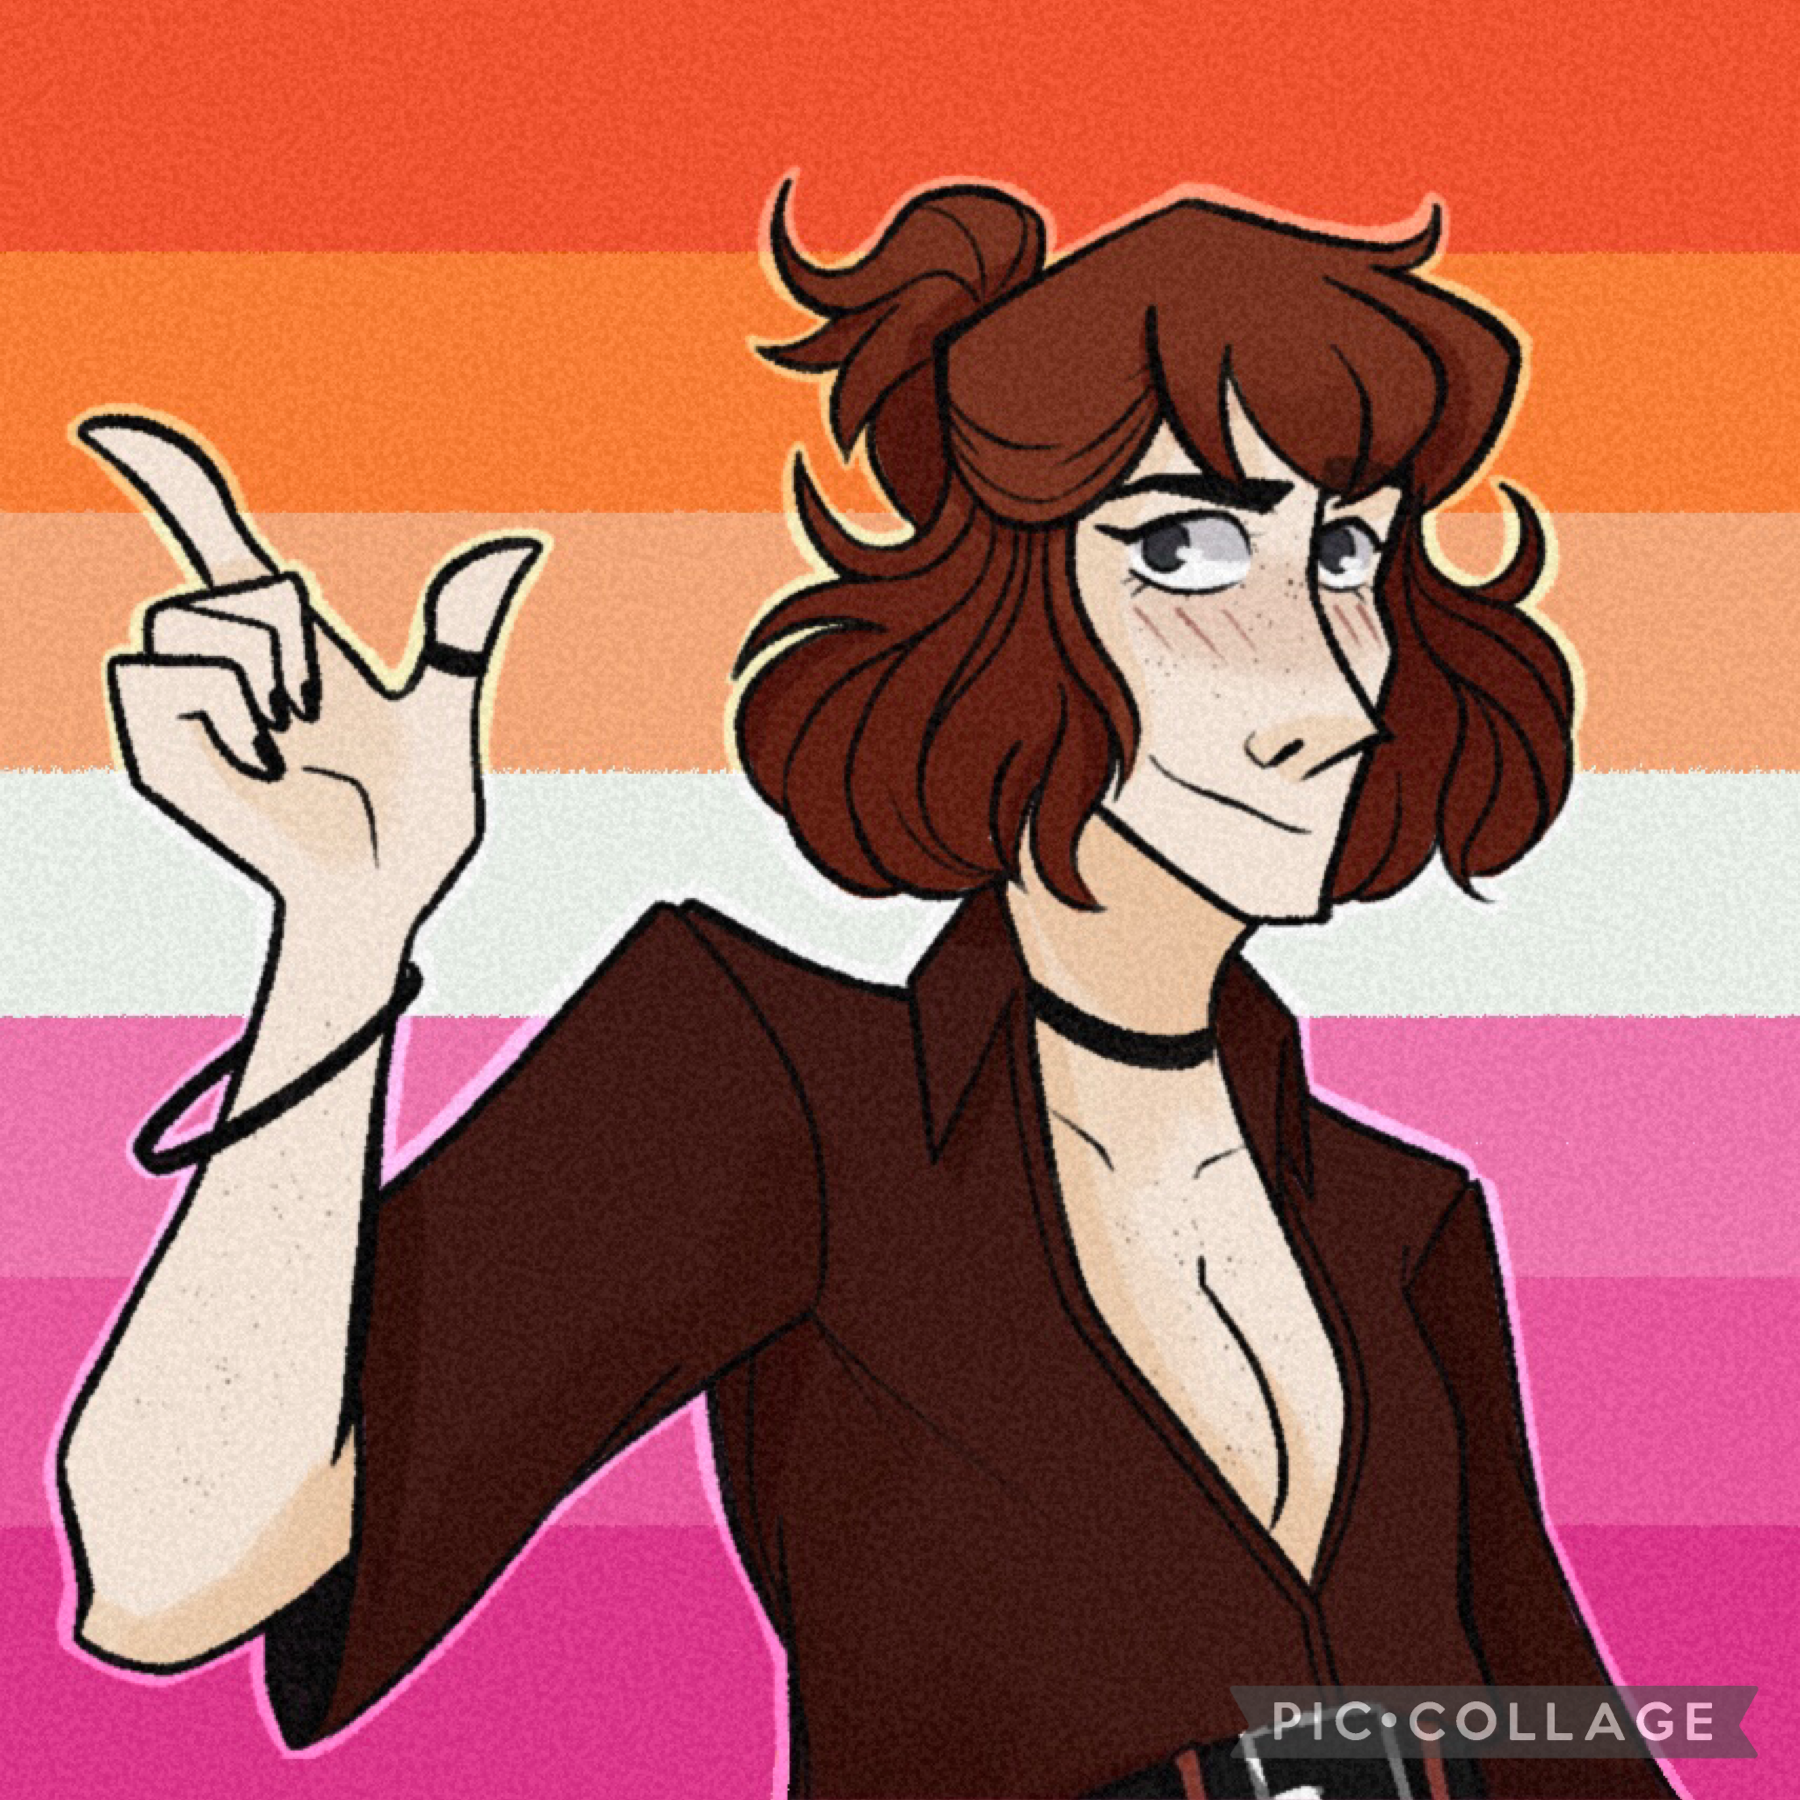 also i updated this drawing for pride month 